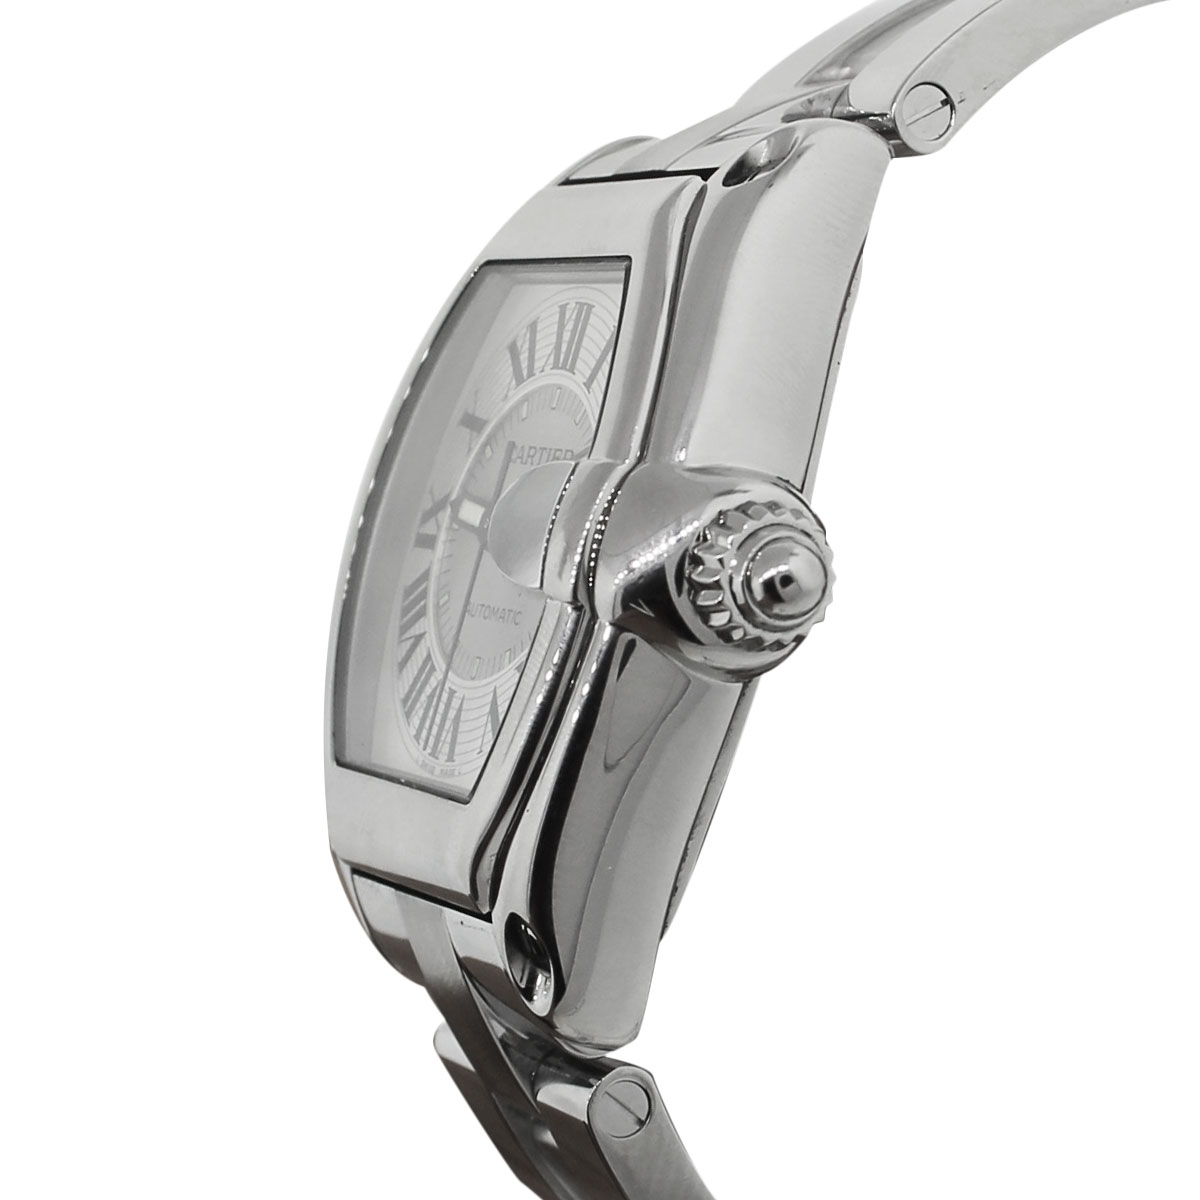 Cartier Boca Raton Roadster 2510 Stainless Steel Silver Dial Watch